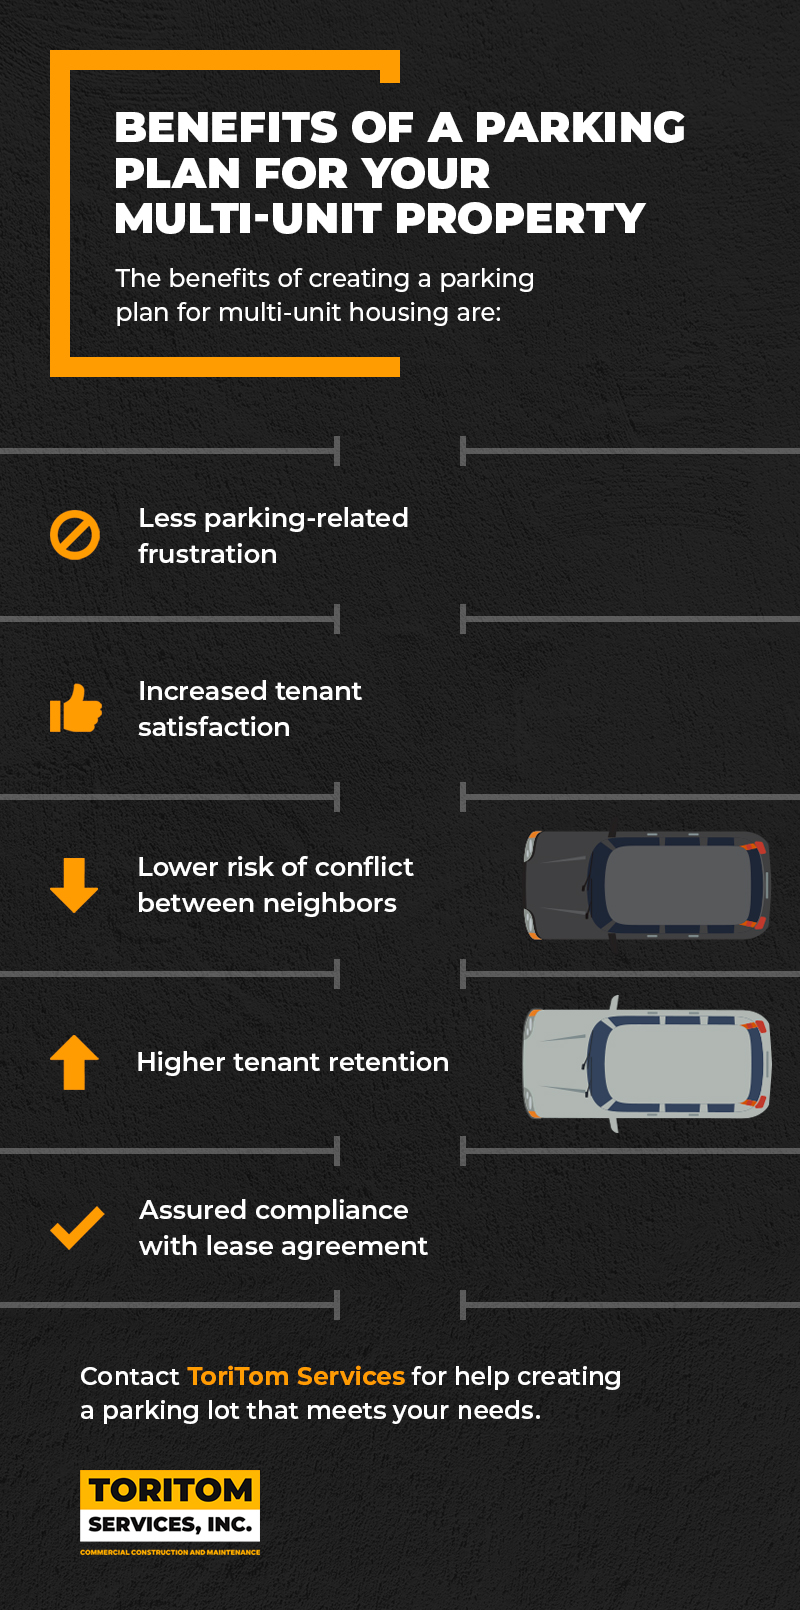 Benefits of a Parking Plan for Your Multi-Unit Property 